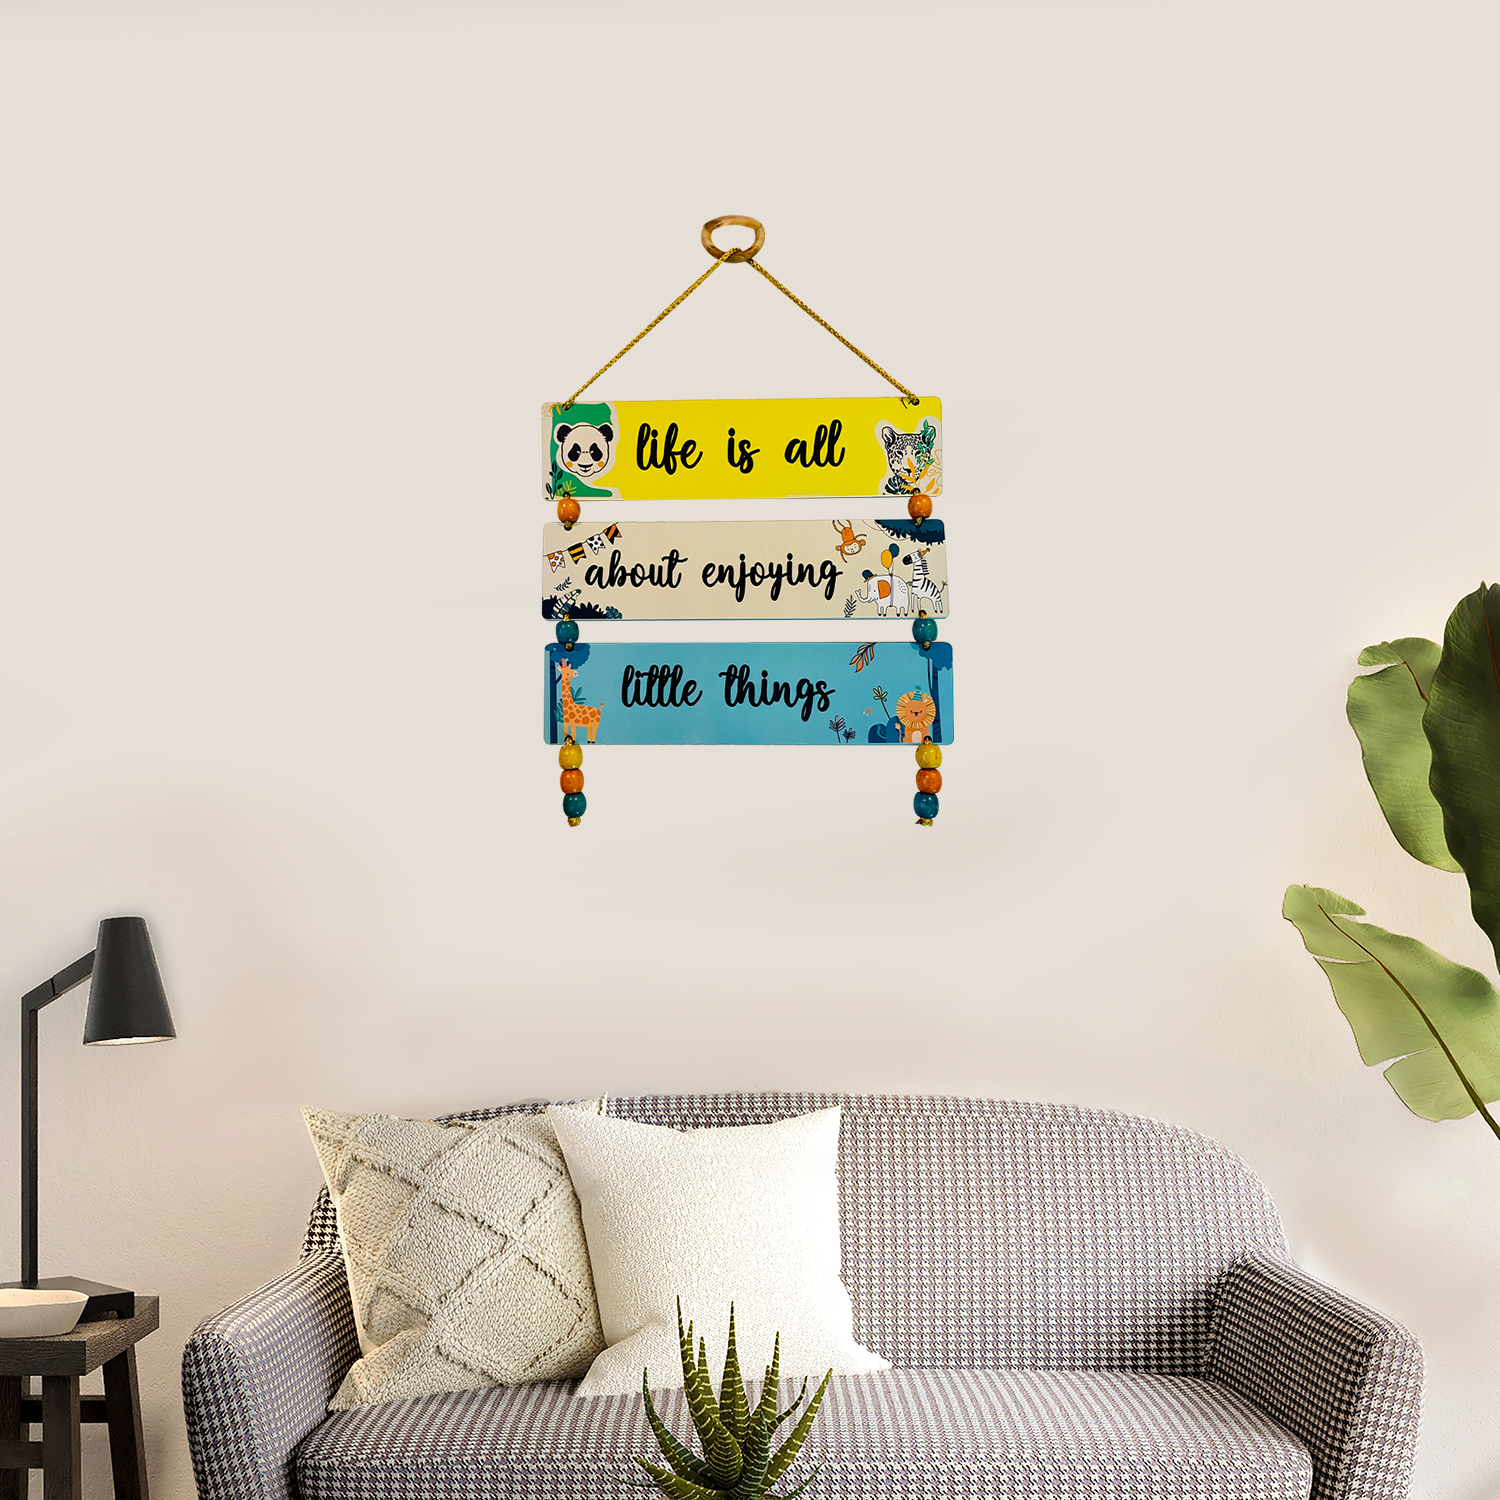 BookYourGift - Buy 3 Layer Wall Hanging Home Decor, Buy 3 Layer Wall Hanging Item for Living Room